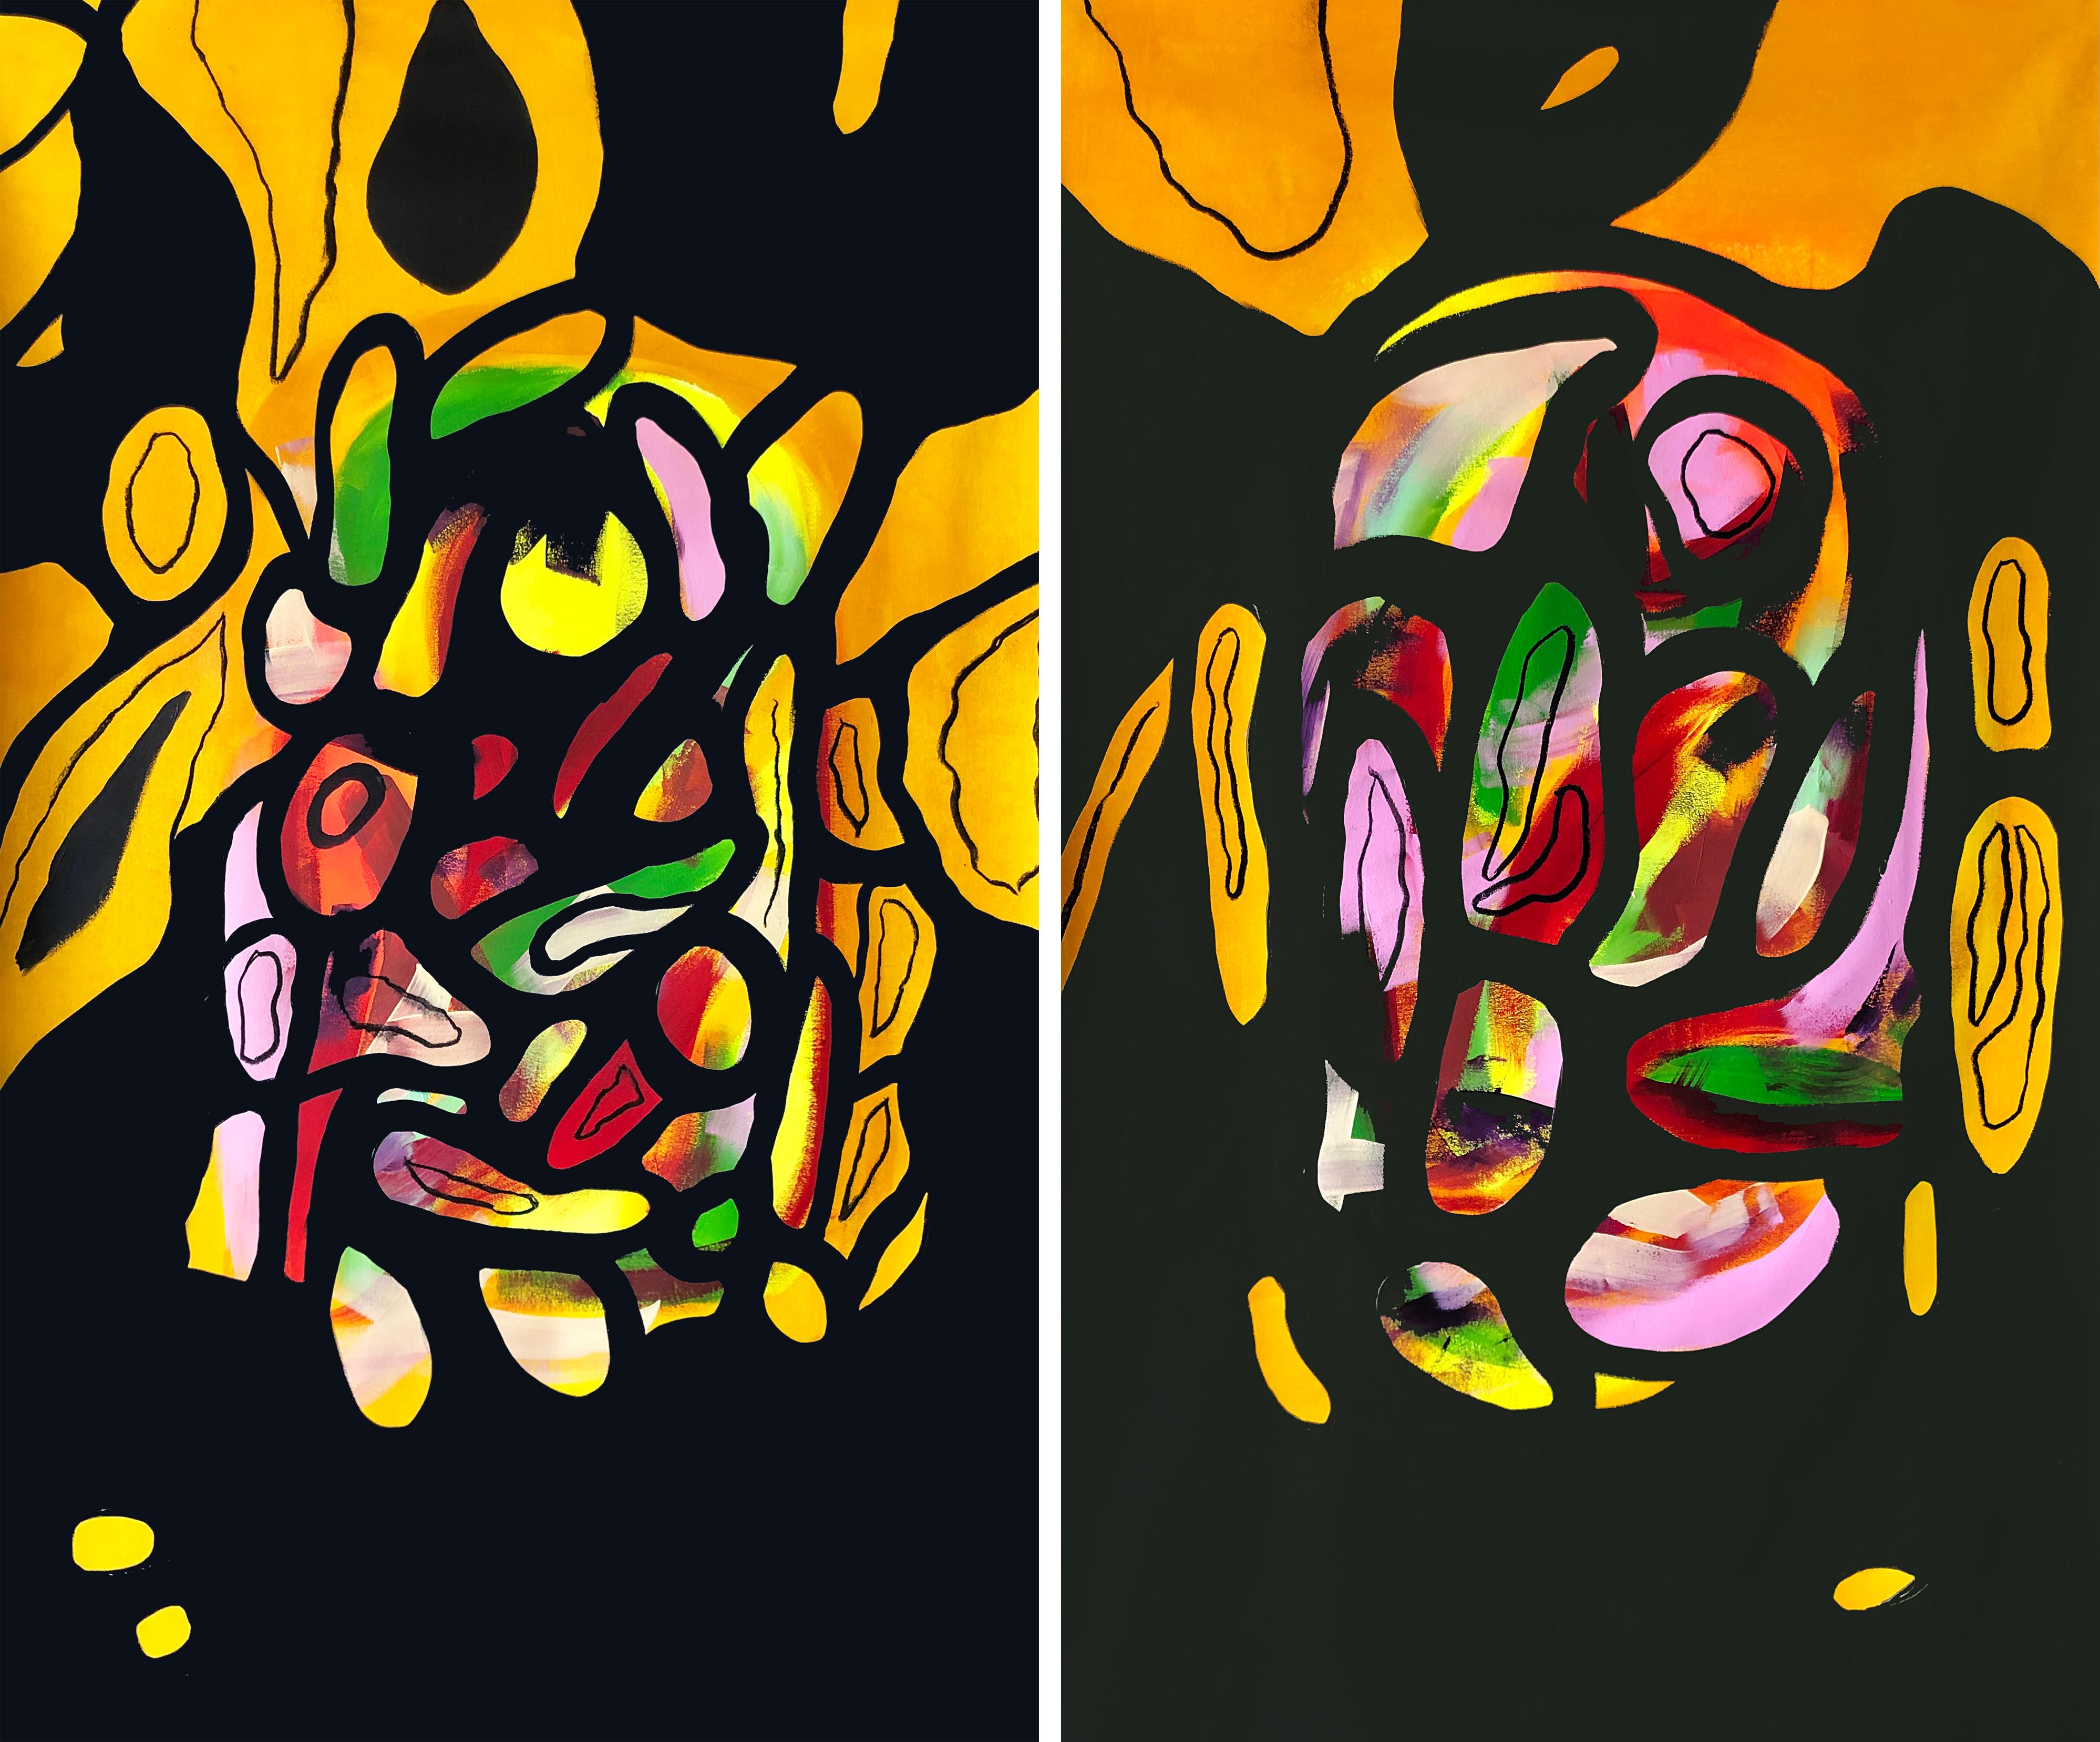  SILENCIO #1 and #2 Diptych. Abstract painting on Canvas - Mixed Media Art by Alec Franco 